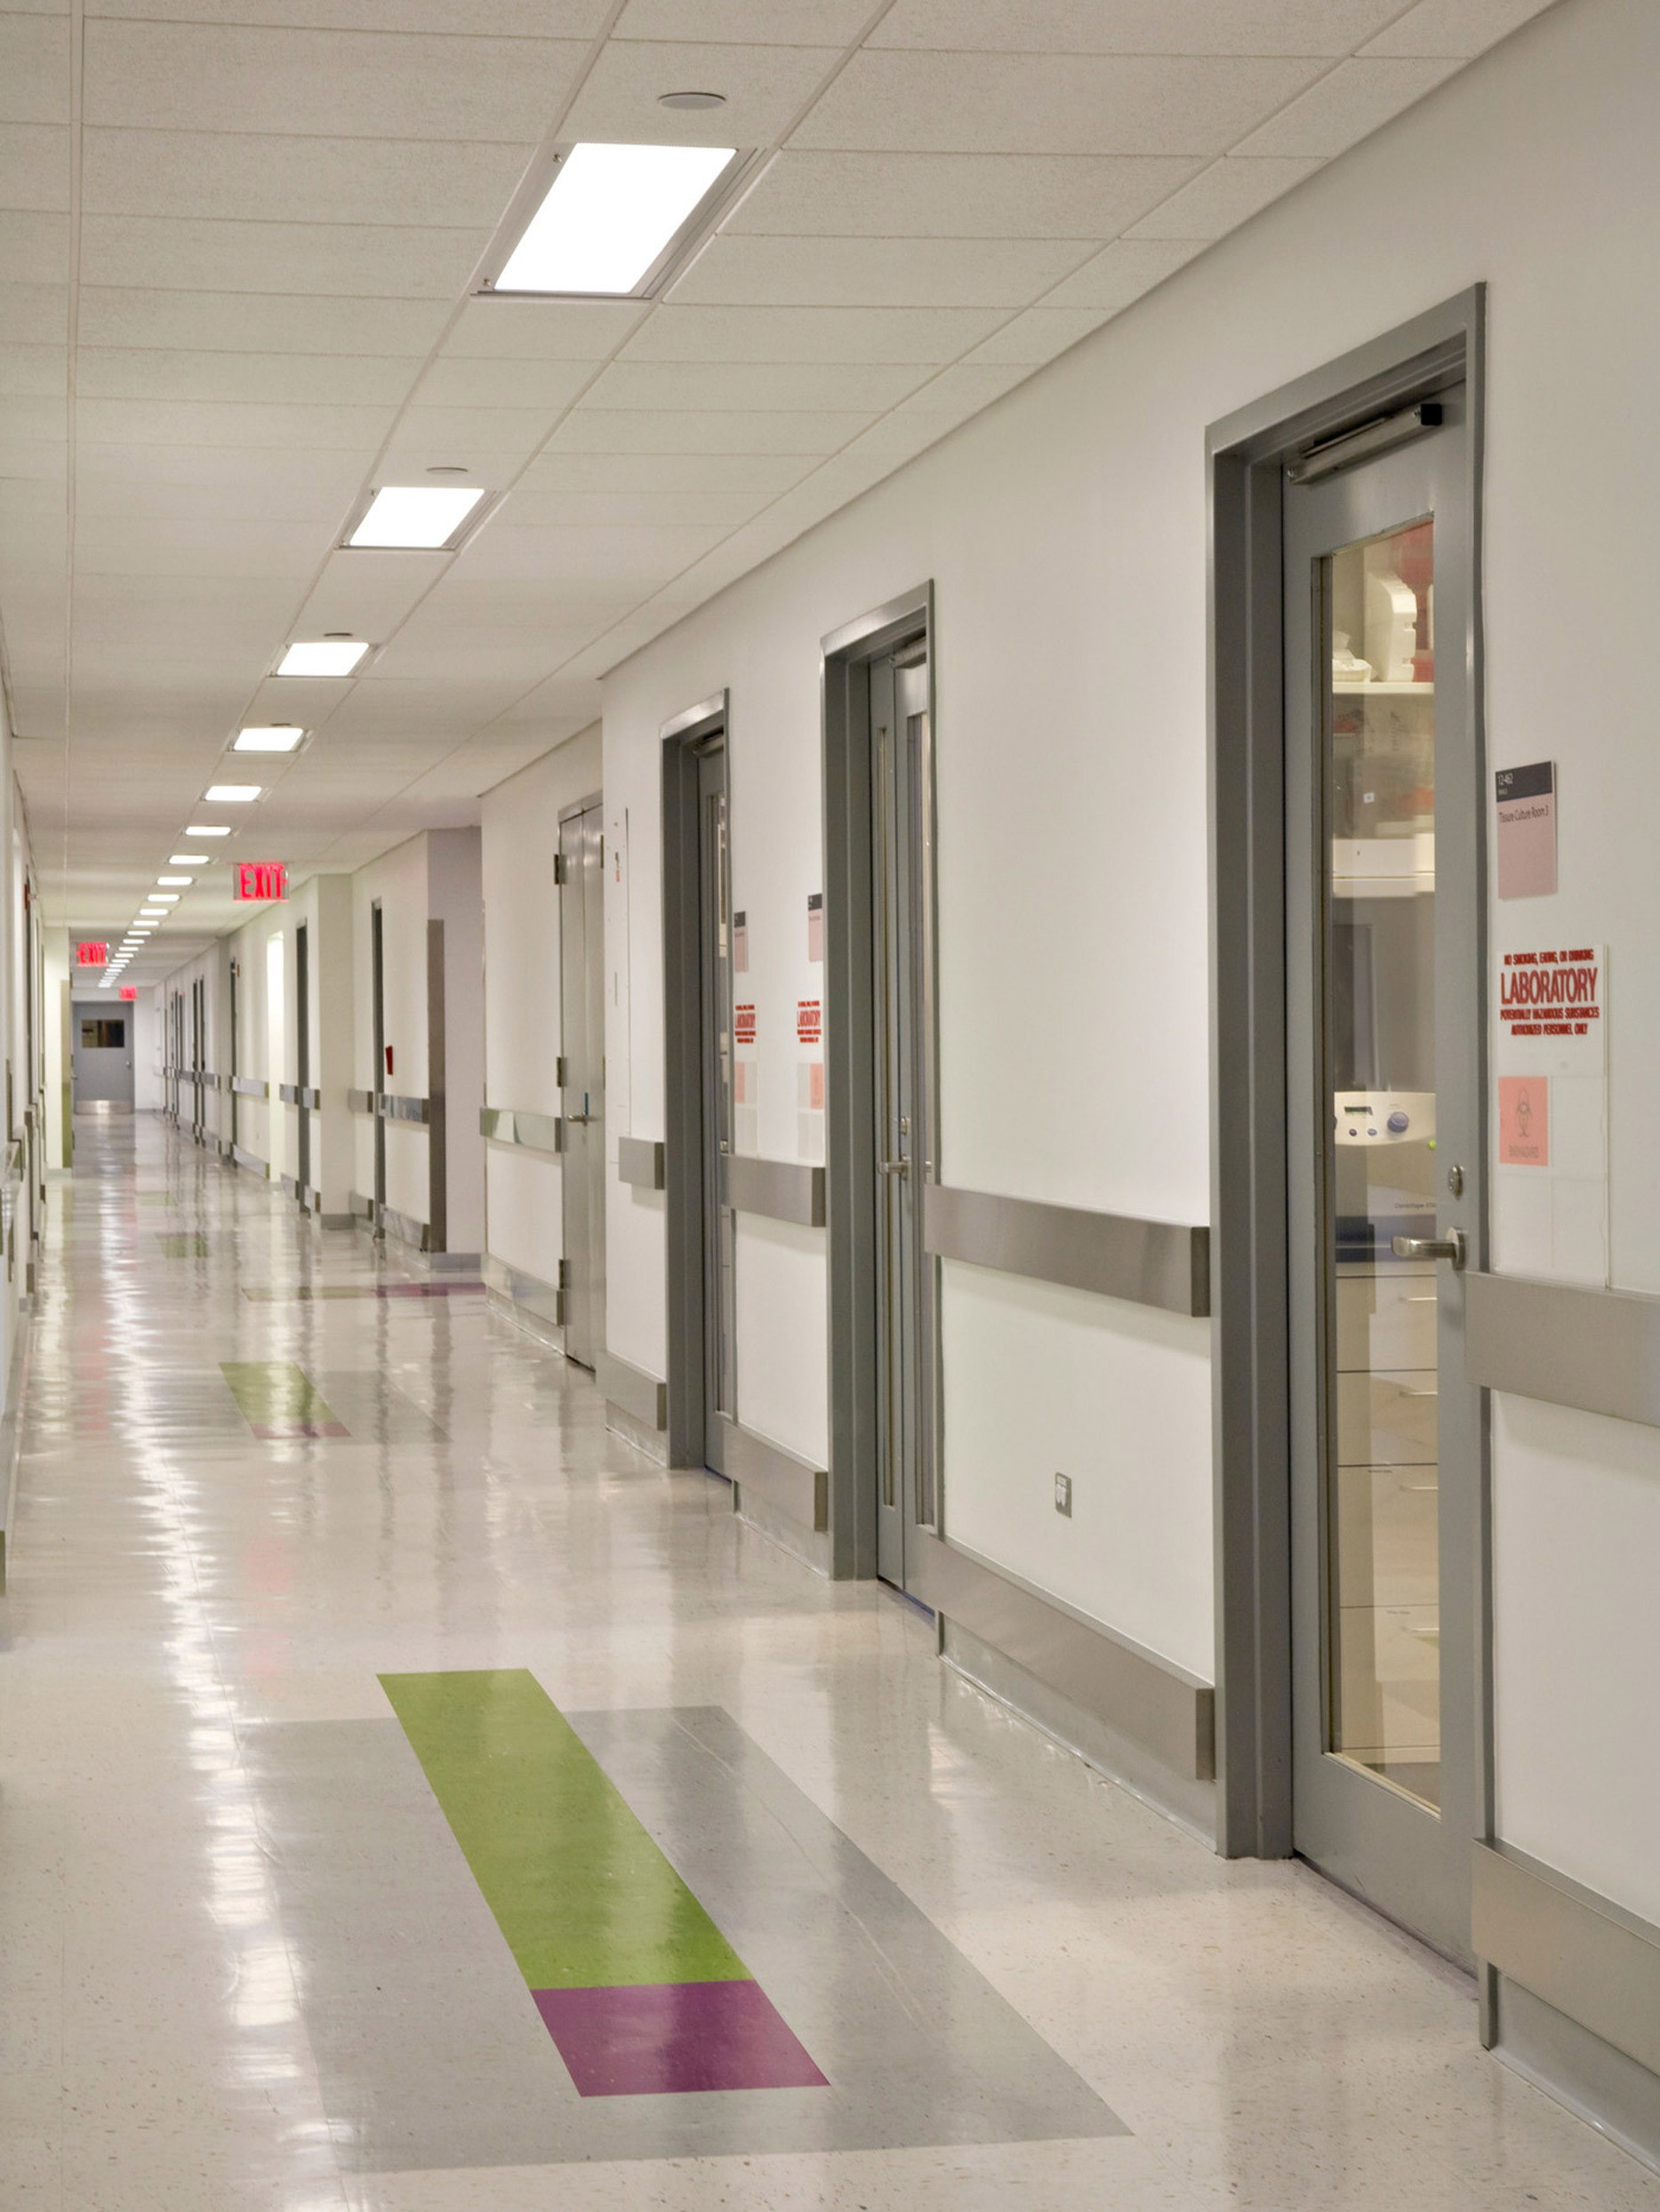 A long, brightly-lit hospital corridor featuring a clean, minimalist design with white walls, reflective flooring, and uniformly spaced gray doors with glass panels. Colorful floor decals add a navigation aid and visual interest.